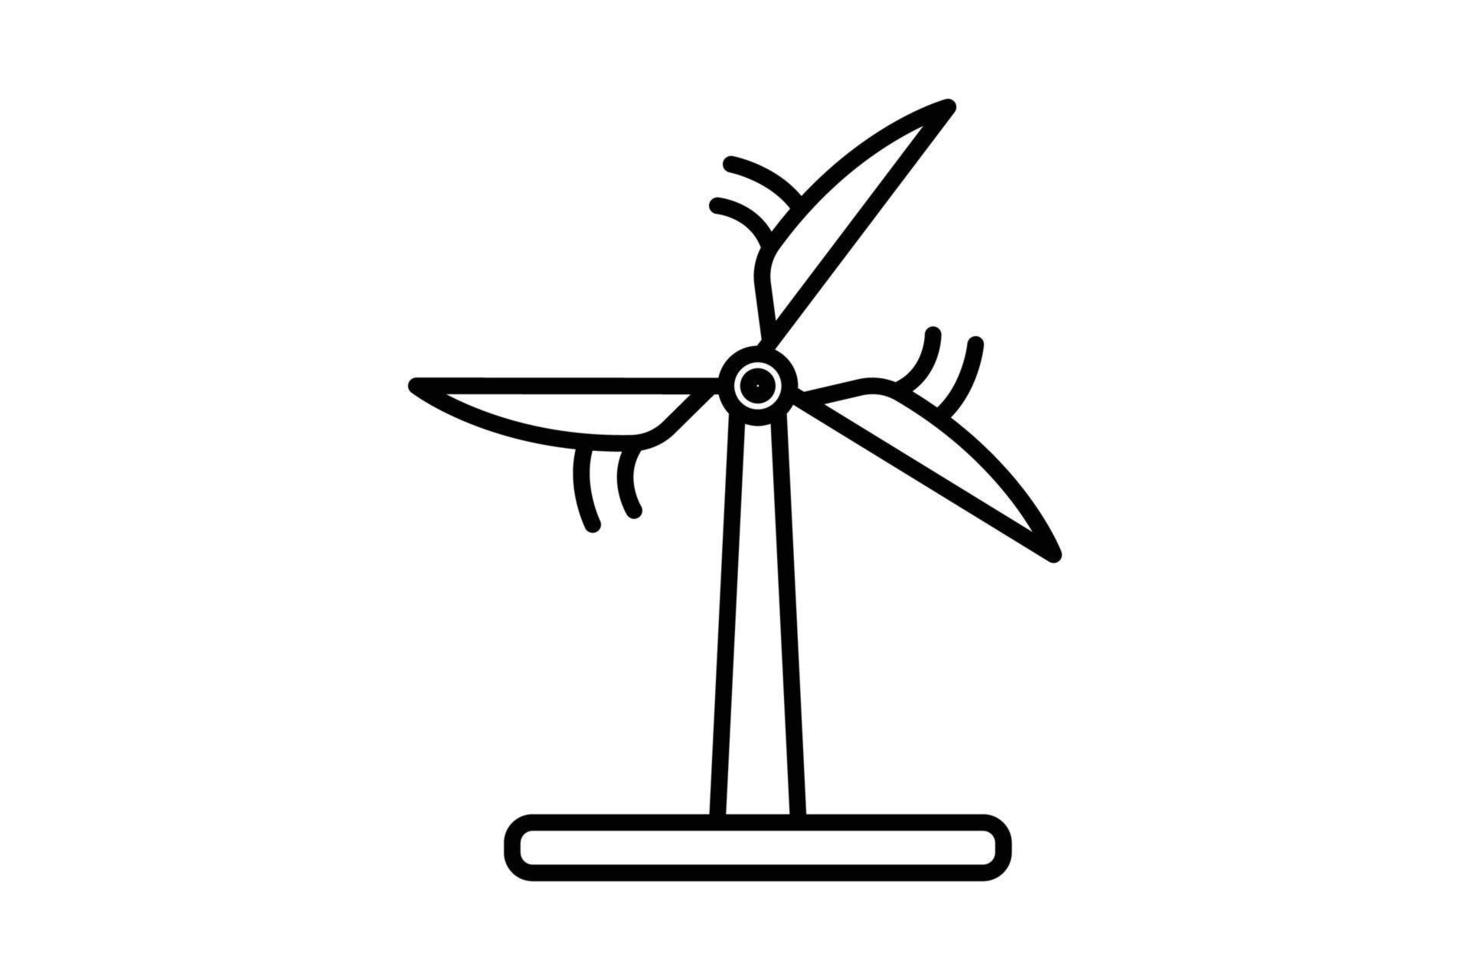 Wind power icon illustration. icon related to ecology, renewable energy. Line icon style. Simple vector design editable